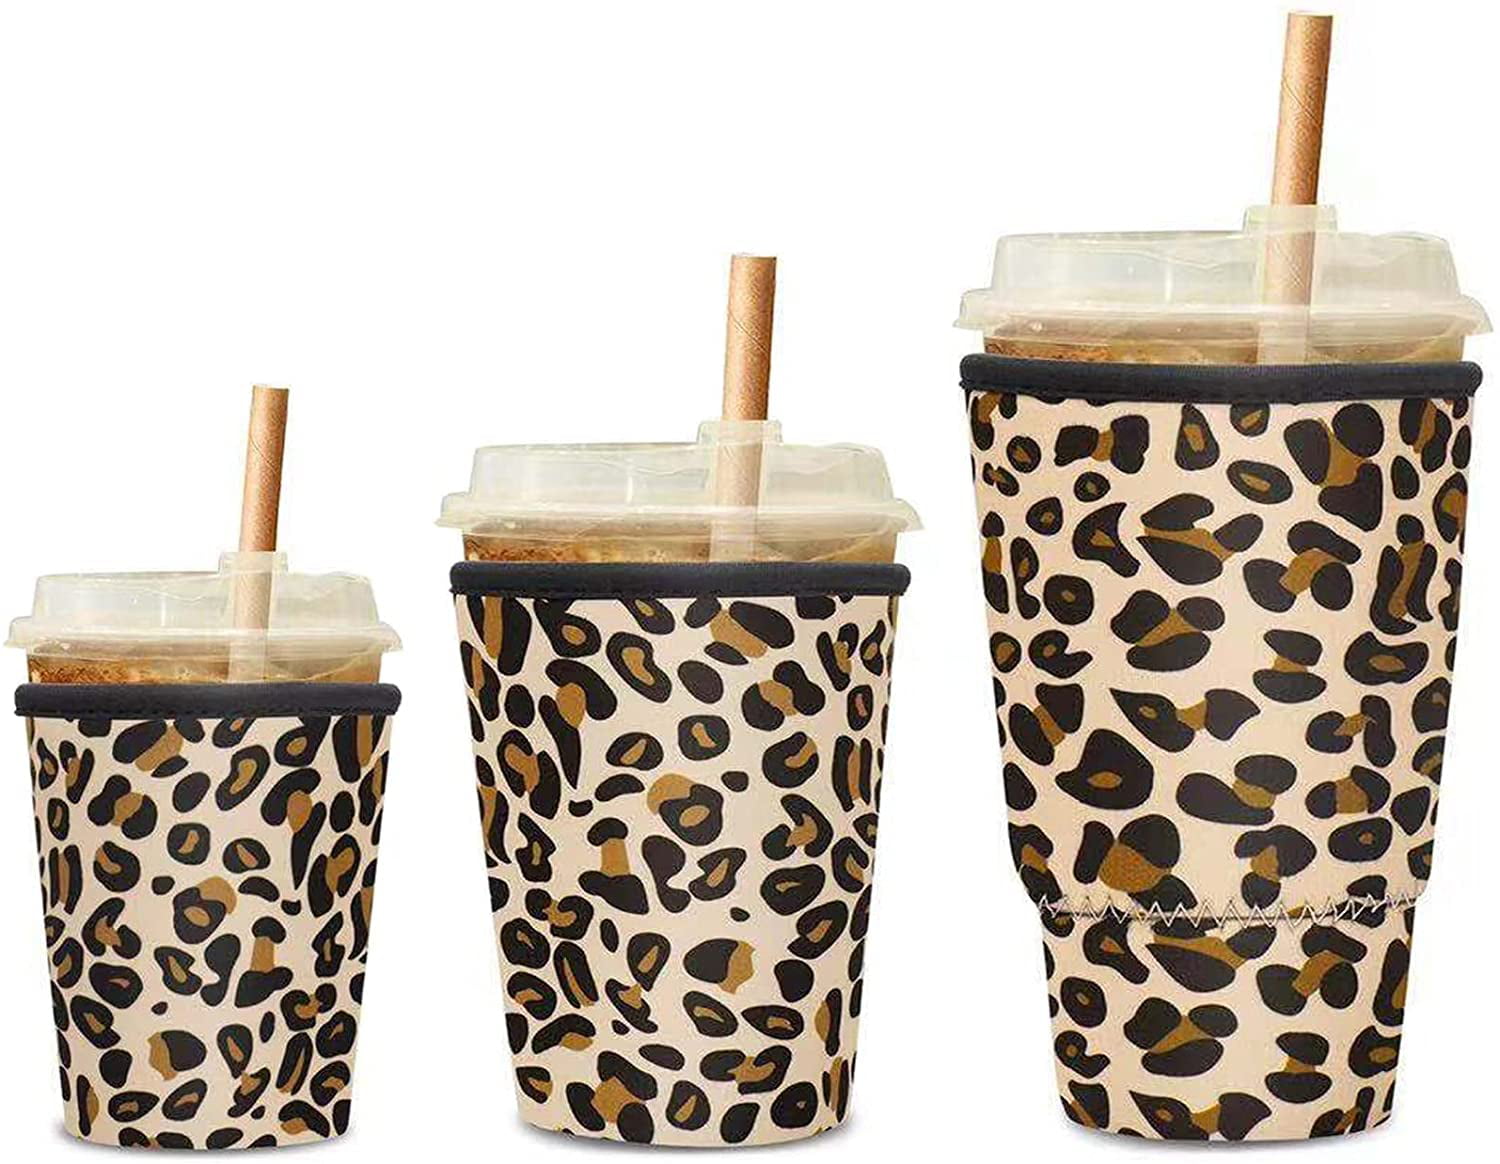 Dunkin Donuts 16-22oz Neoprene Holder for Starbucks Coffee Beautyflier Pack of 2 Reusable Iced Coffee Cup Insulator Sleeve with Handle for Cold Beverages Pattern1 McDonalds